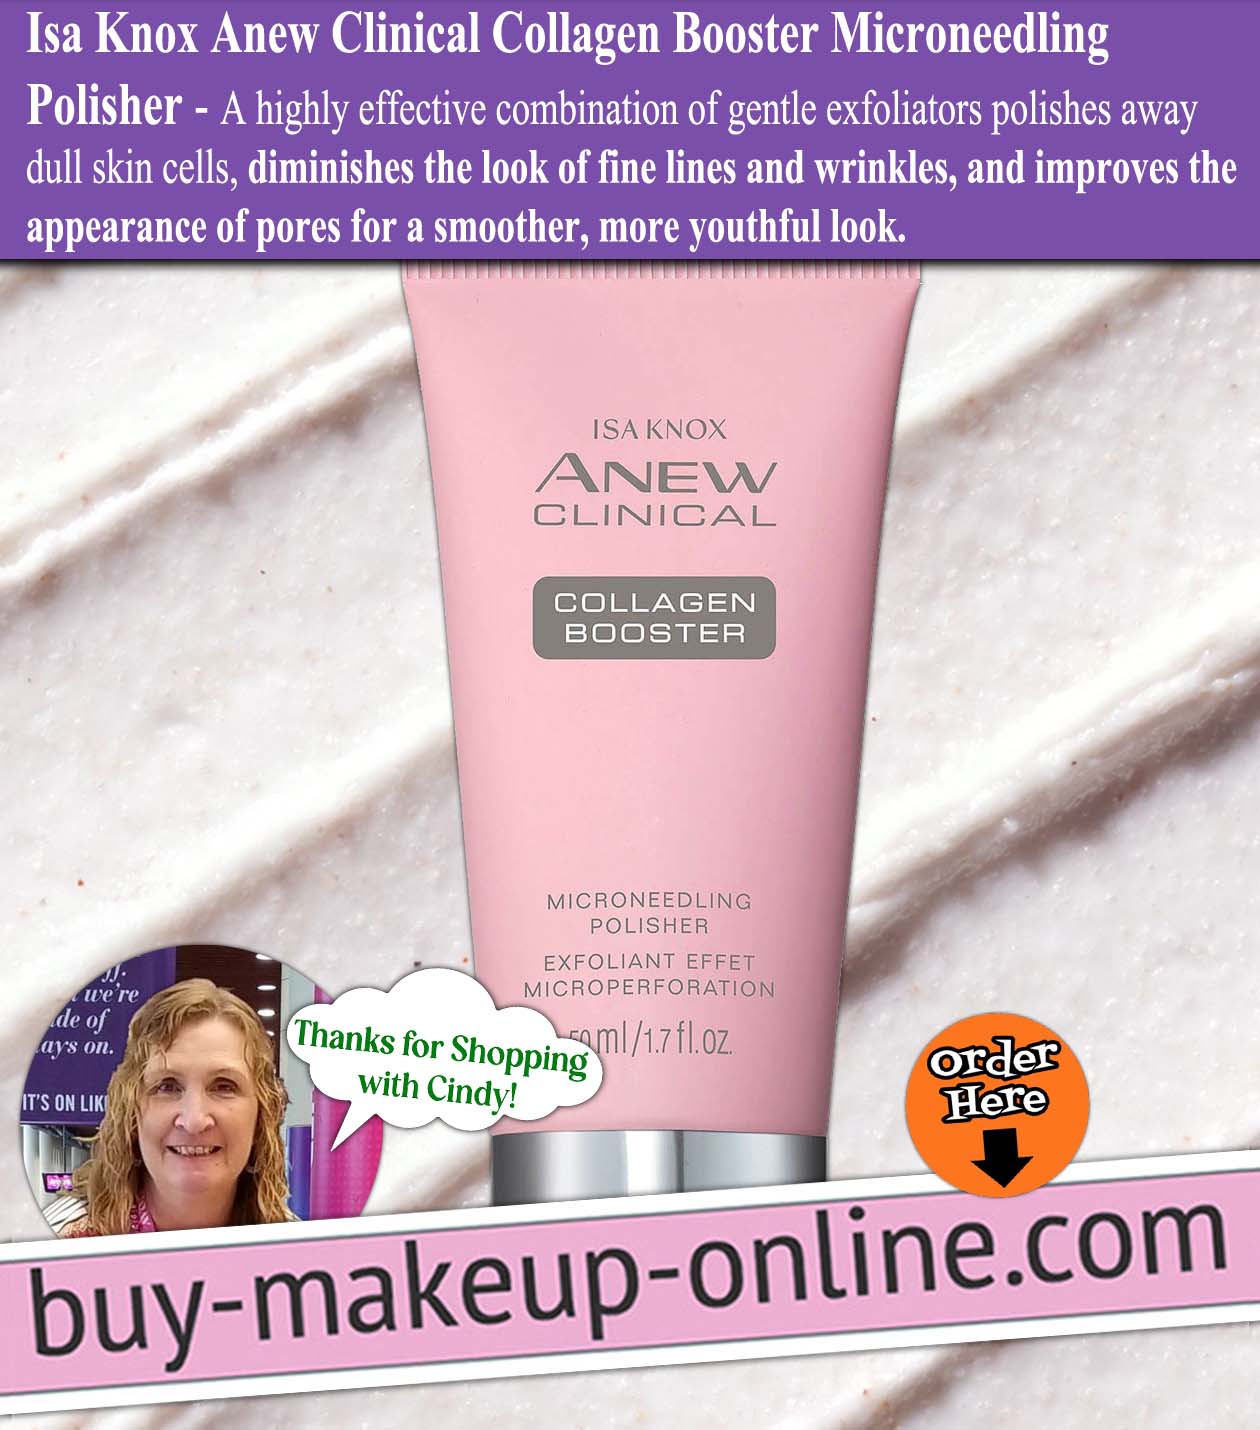 AVON Isa Knox Anew Clinical Collagen Booster Microneedling Polisher 